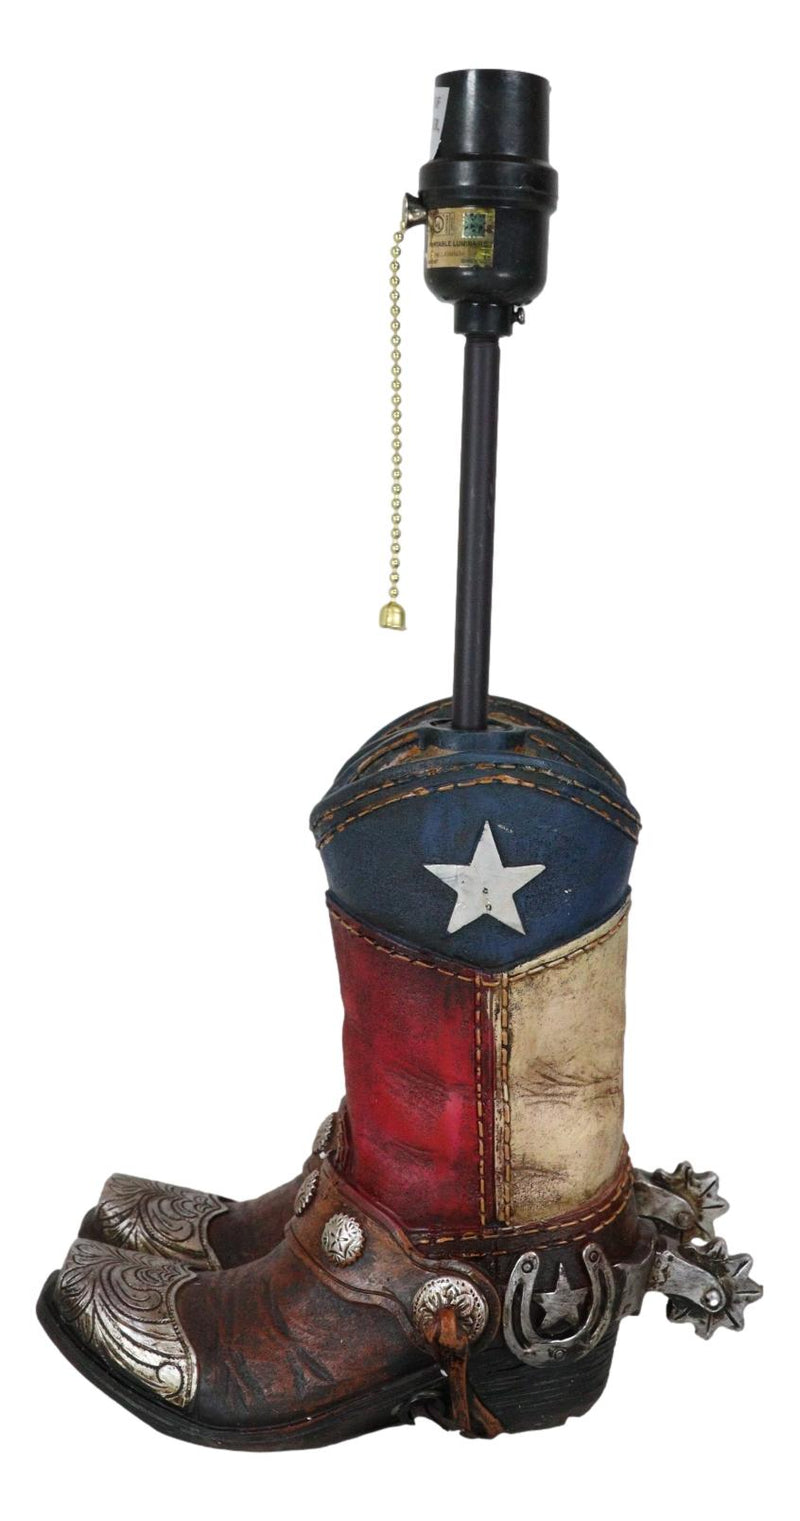 Rustic Western Patriotic Texas Flag Horseshoes Cowboy Spur Boots Table Lamp 19"H